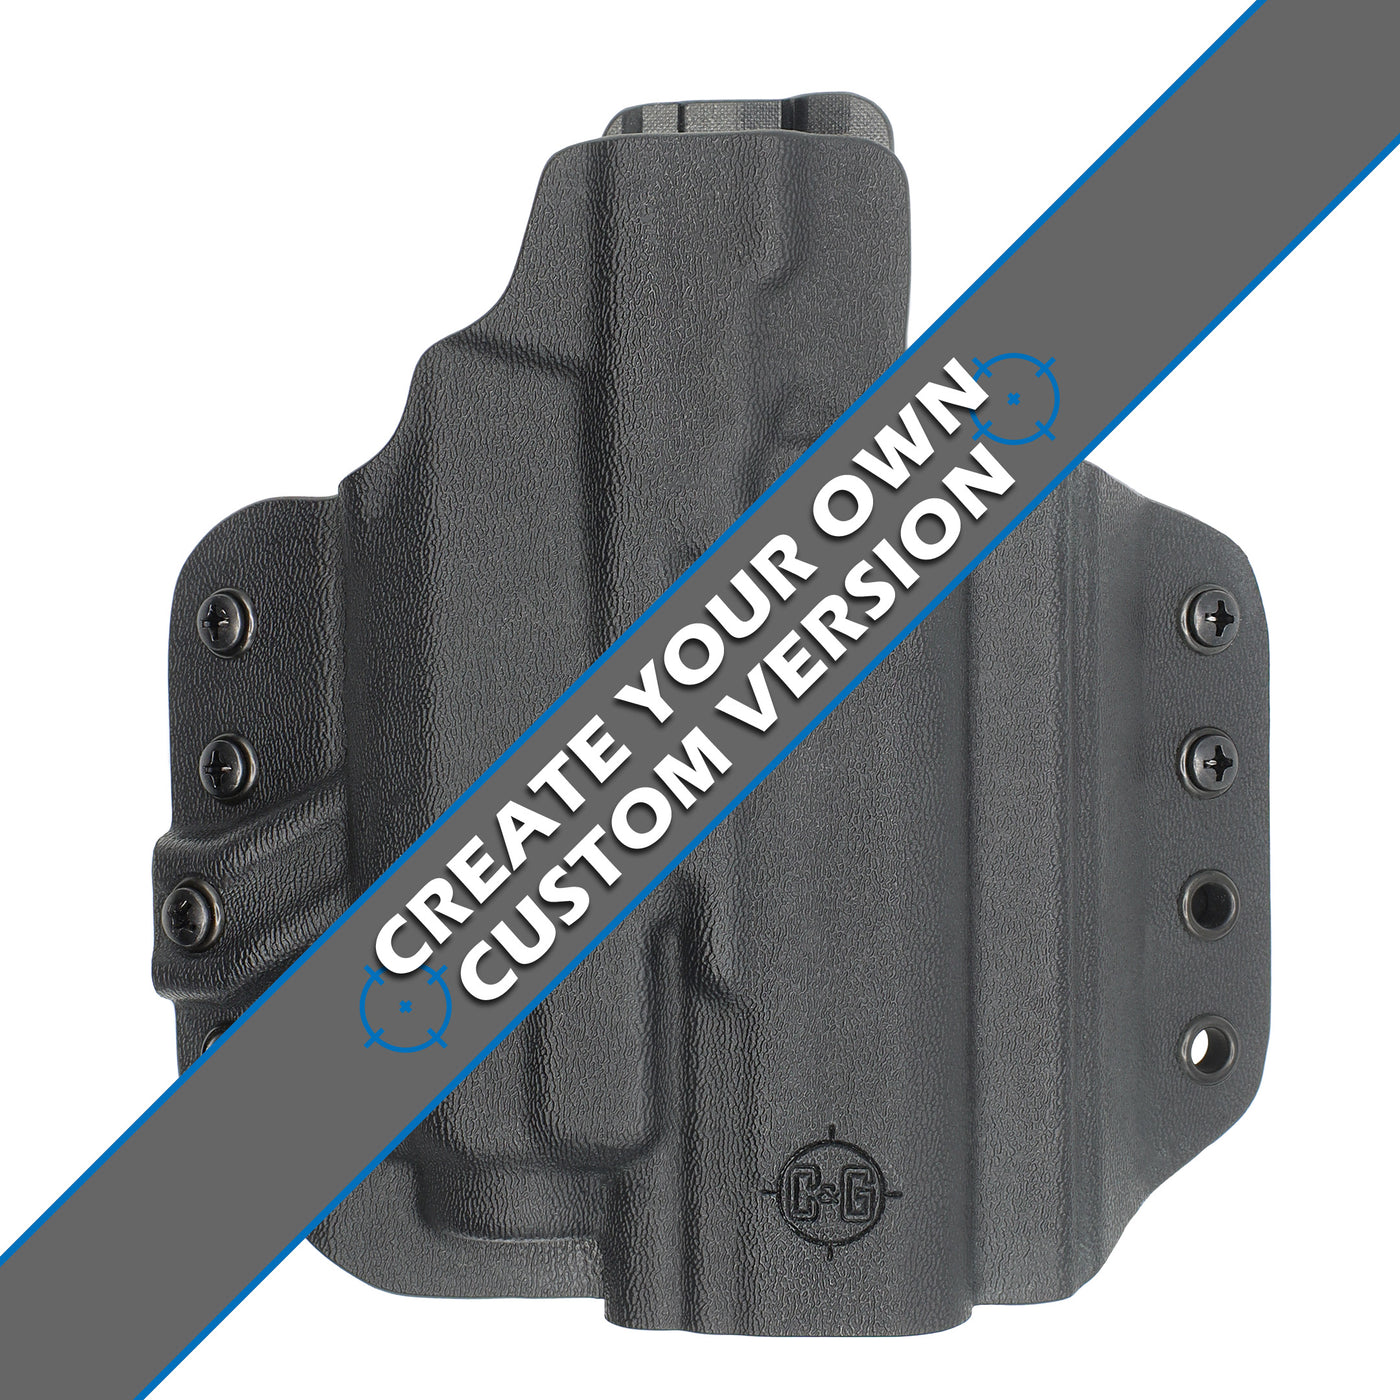 C&G Holsters custom OWB tactical M&P 10/45 streamlight TLR8